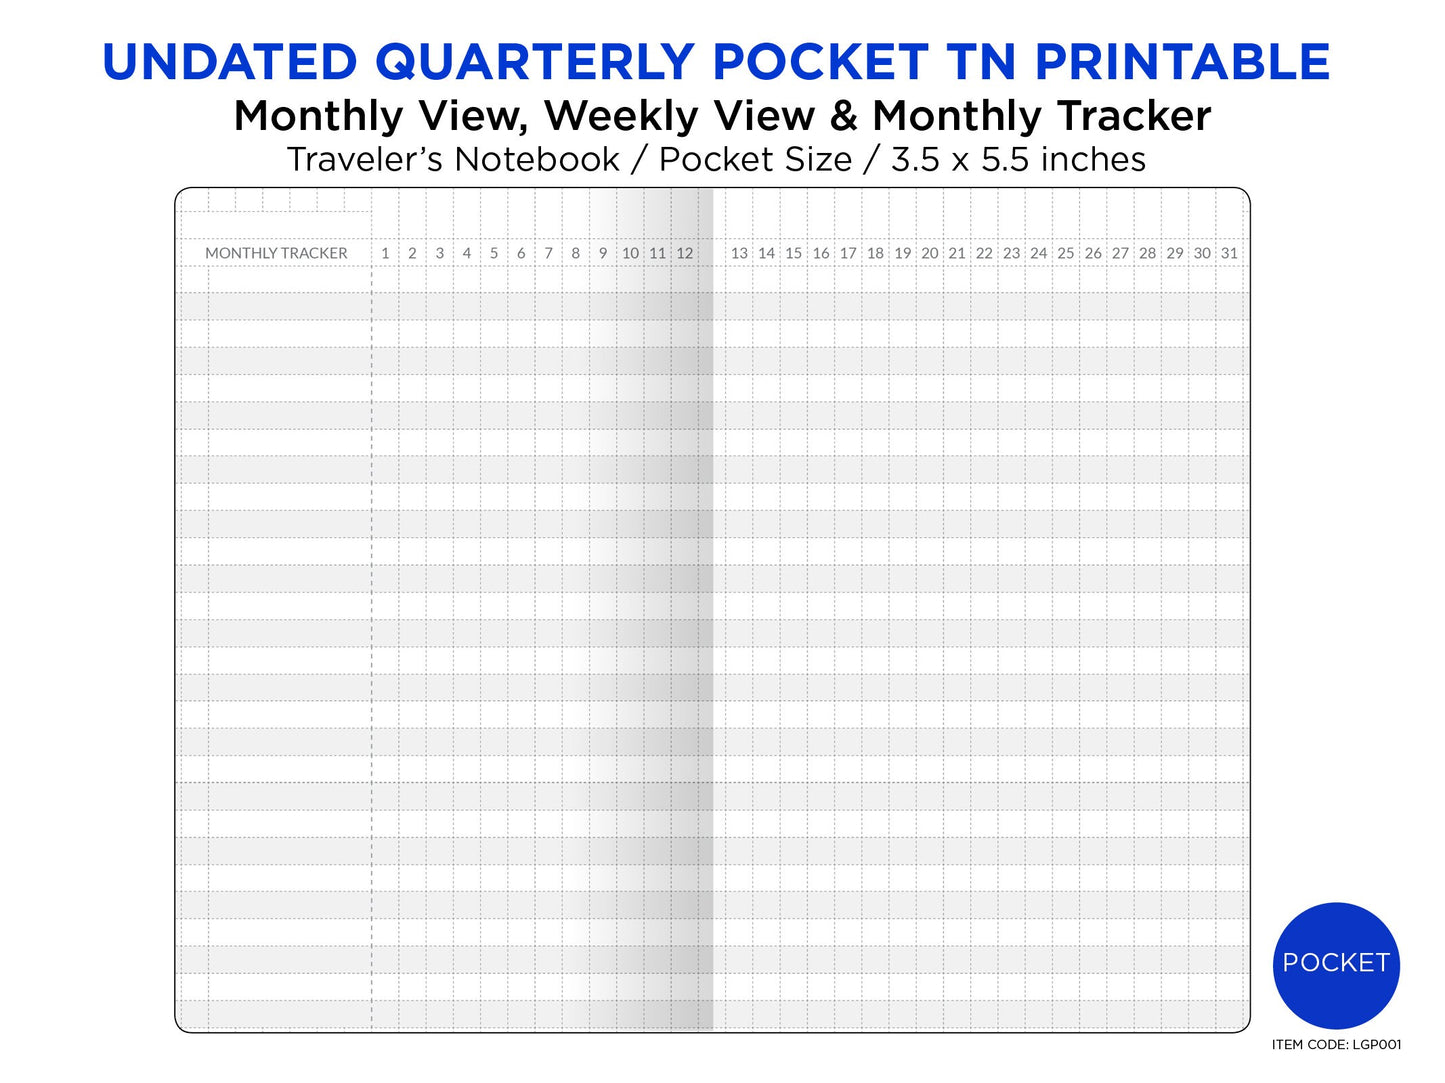 Quarterly POCKET Traveler's Notebook - Monthly View, Weekly View and Monthly Tracker PRINTABLE Undated Insert